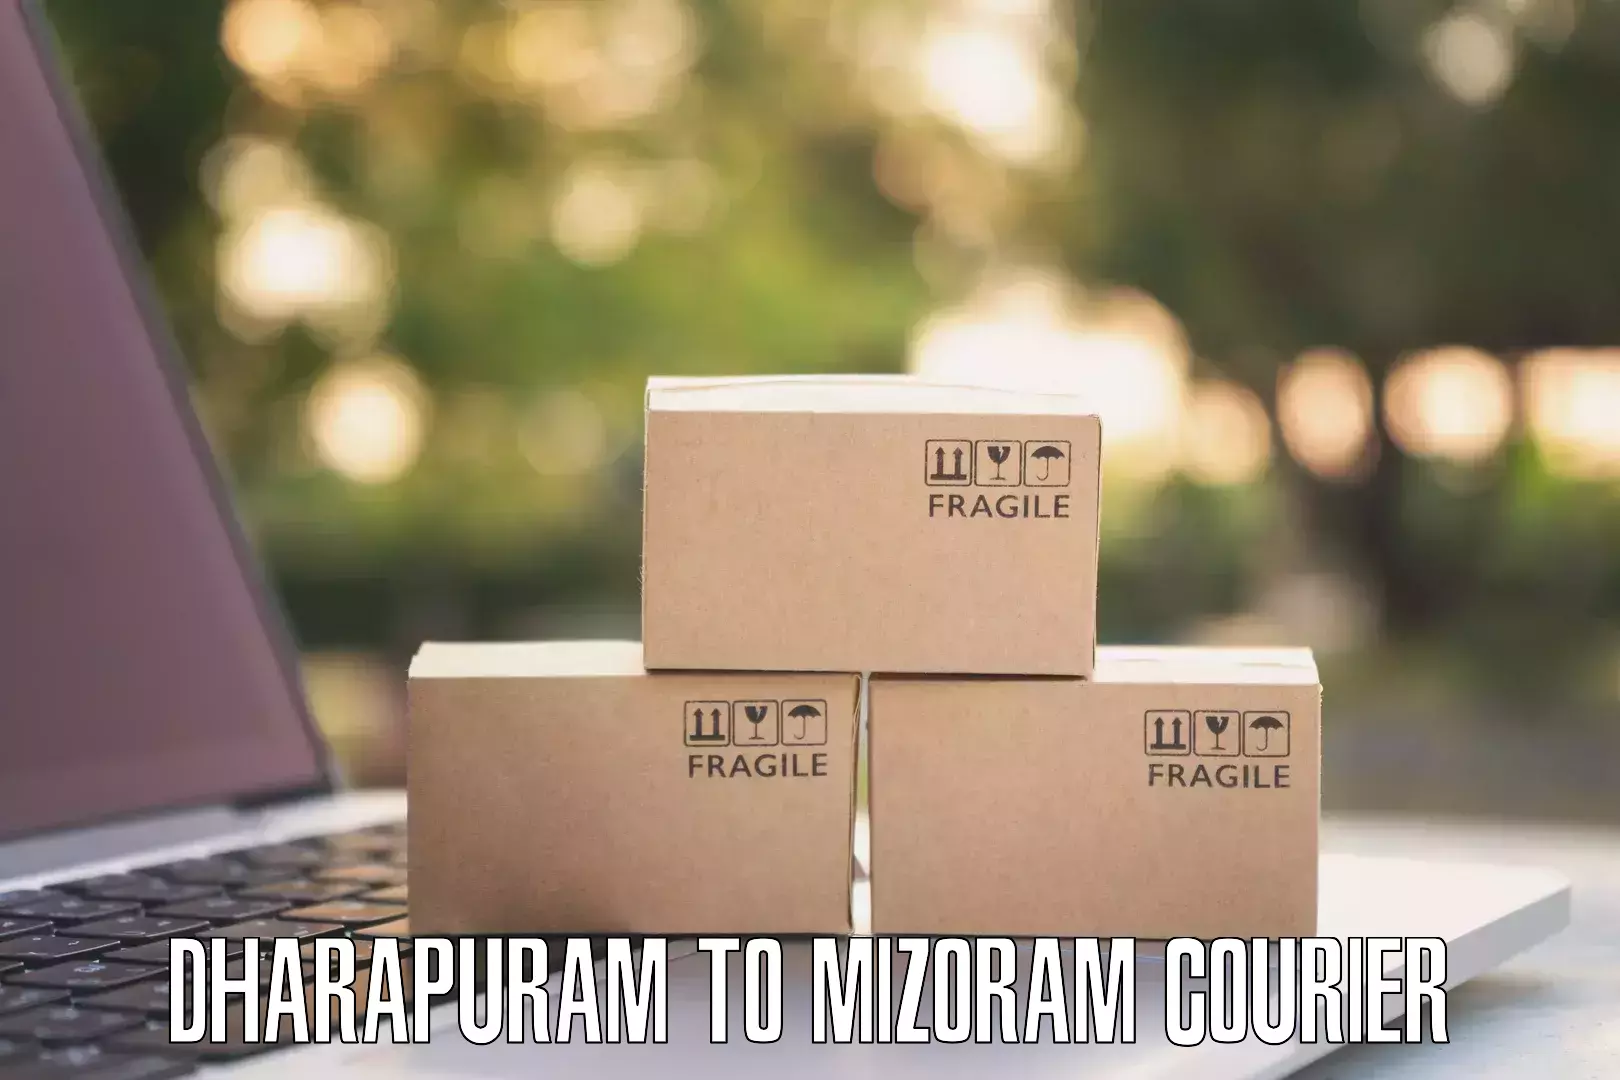 Full-service courier options Dharapuram to Lunglei